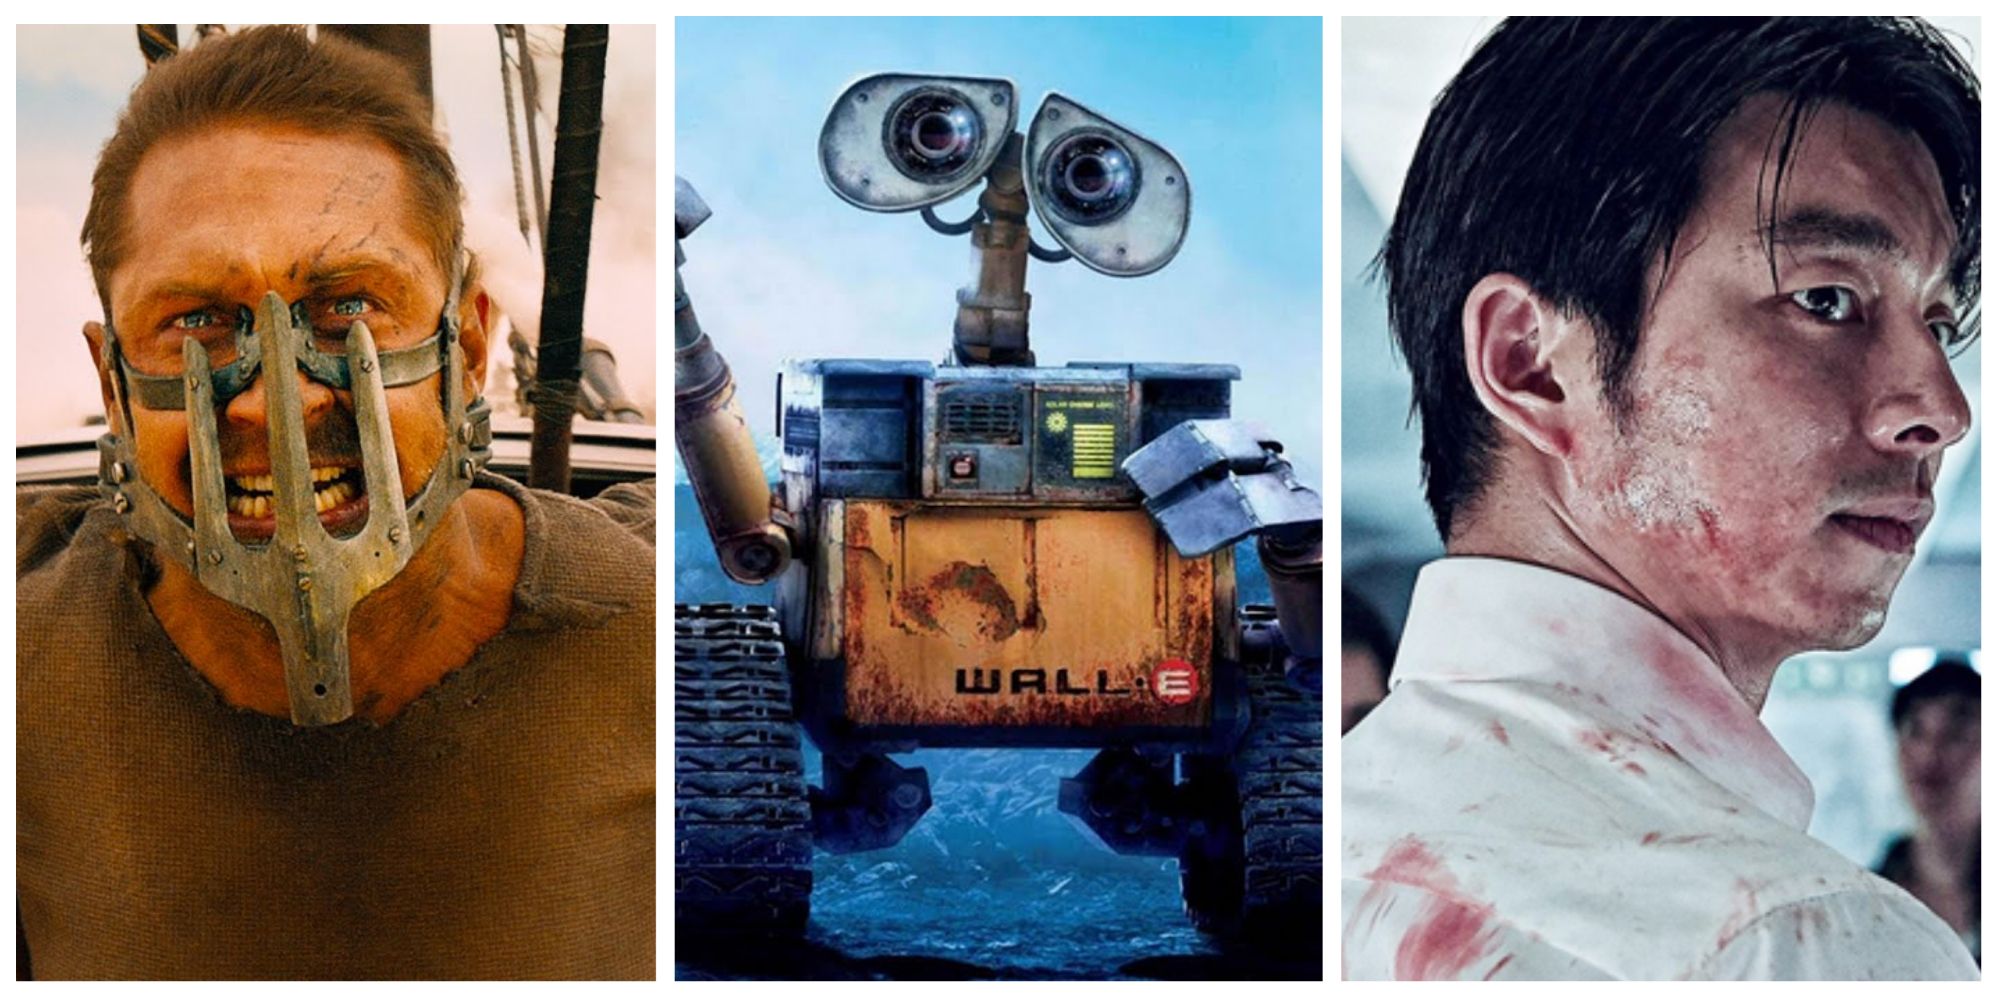 Collage of mad max fury road, wall-e, and train to busan